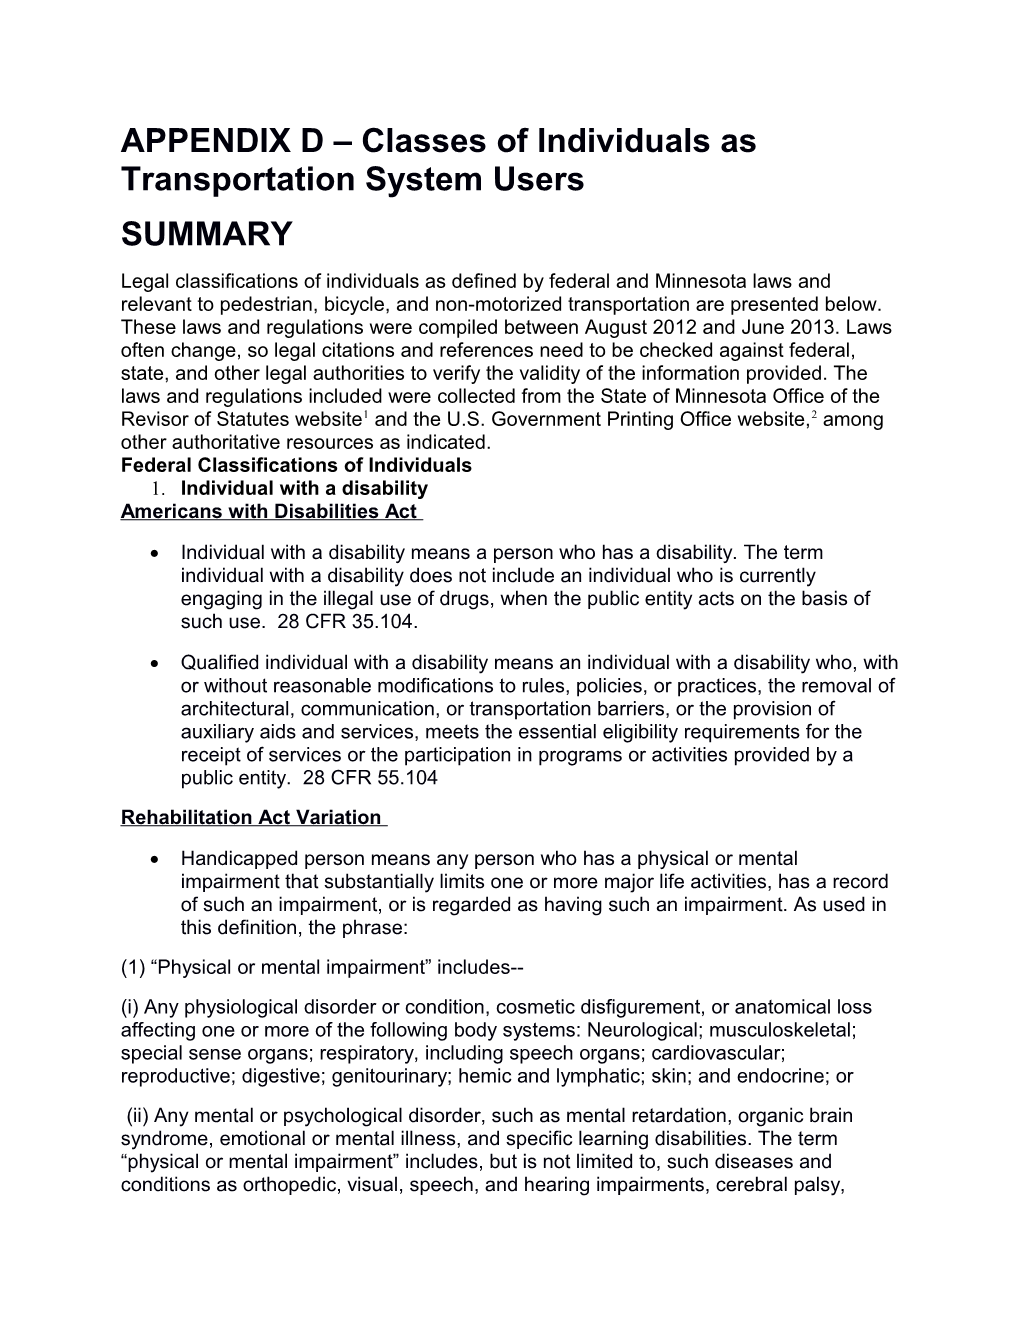 APPENDIX D Classes of Individuals As Transportation System Users